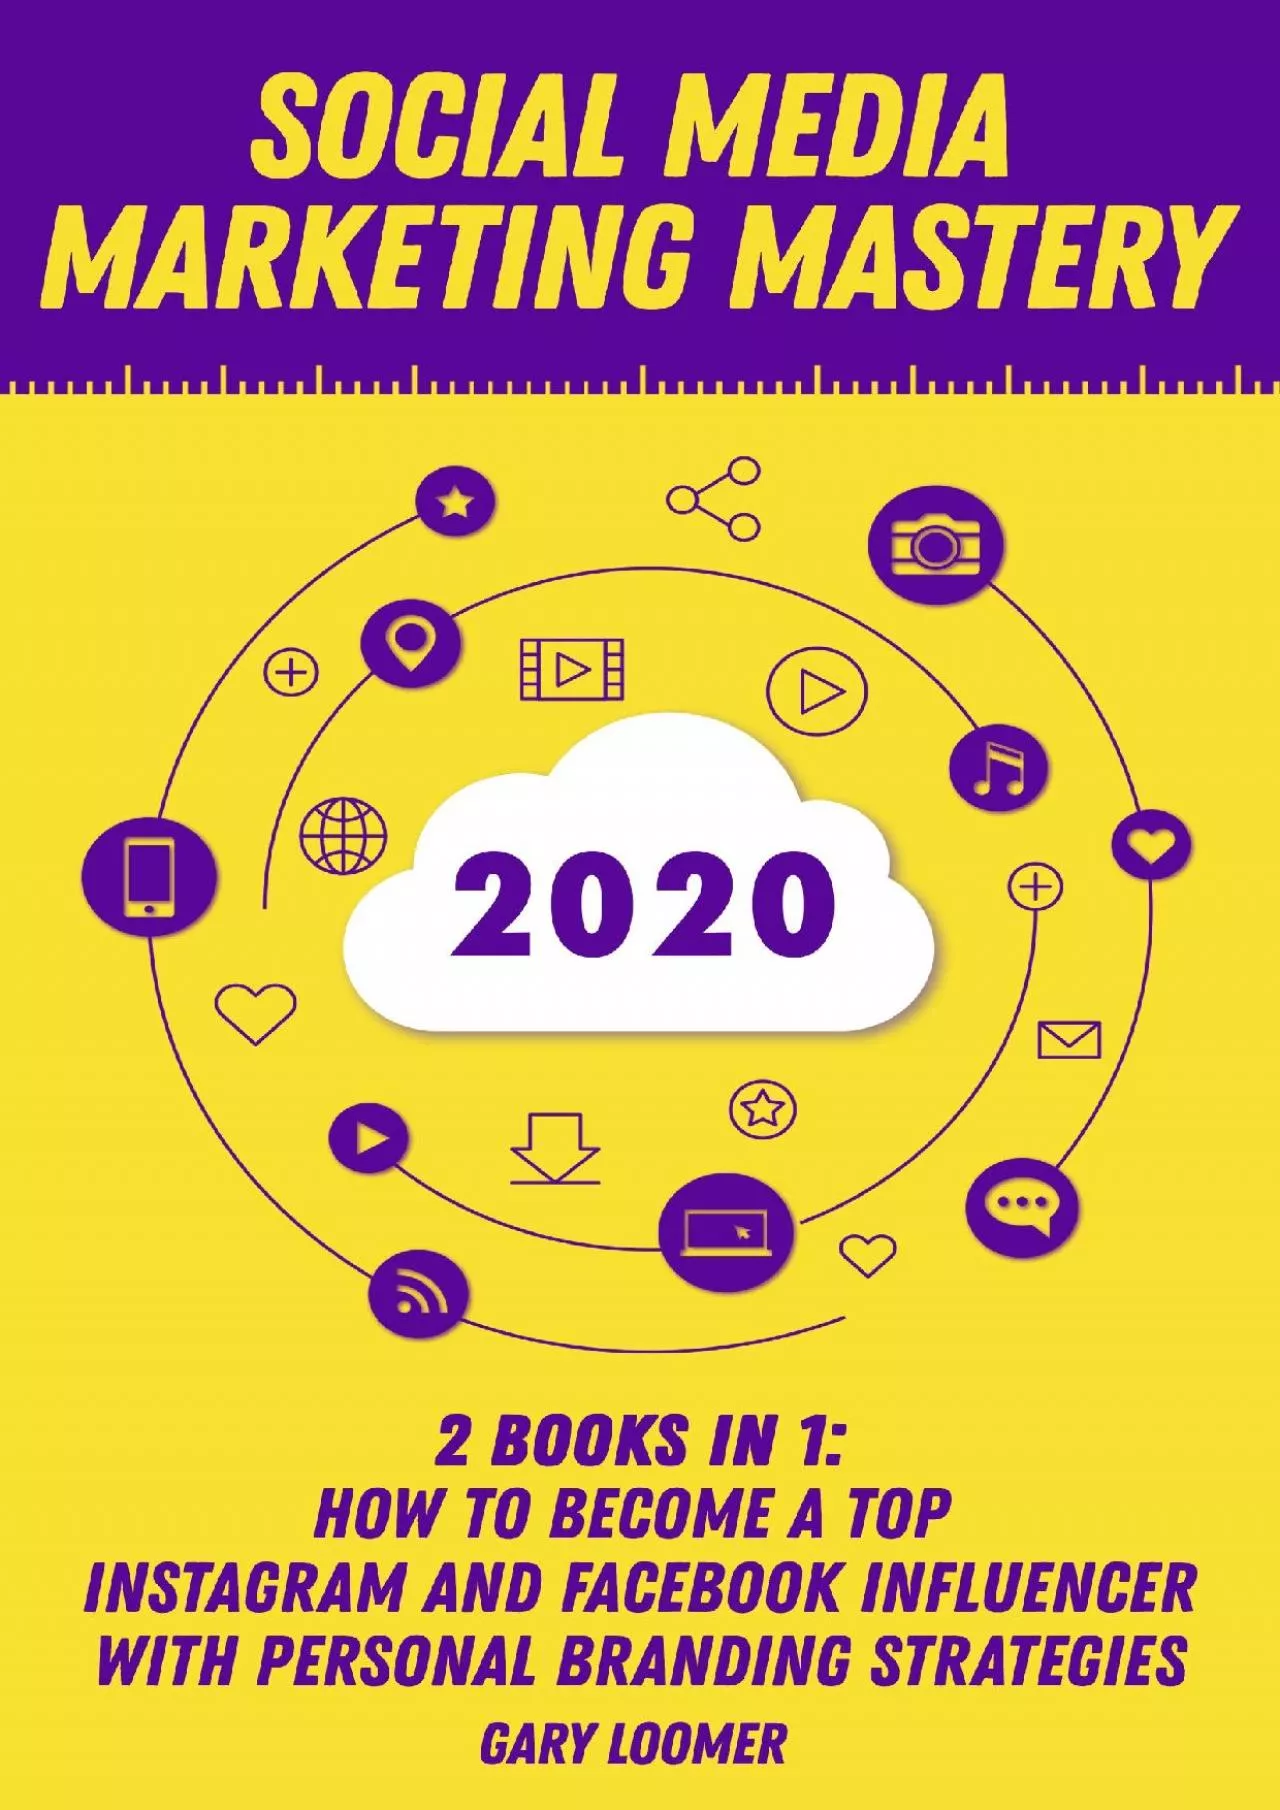 (READ)-Social Media Marketing Mastery 2020: 2 Books in 1 - How to Become a Top Instagram